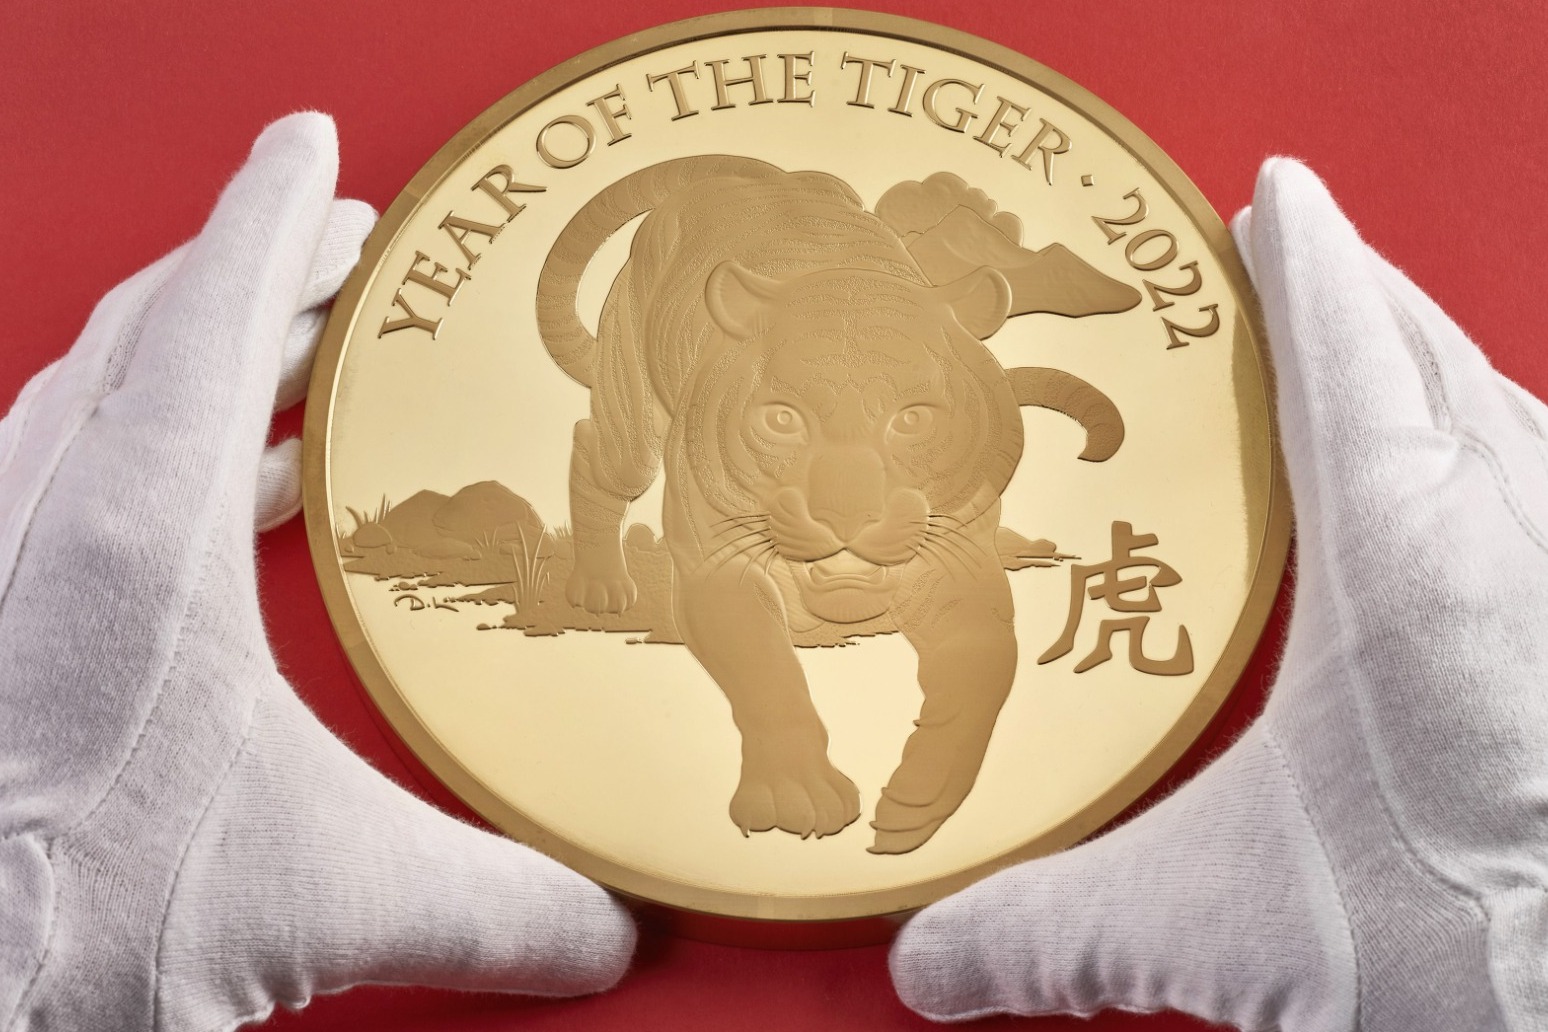 Giant gold coin produced by the Royal Mint to celebrate the Year of the Tiger 